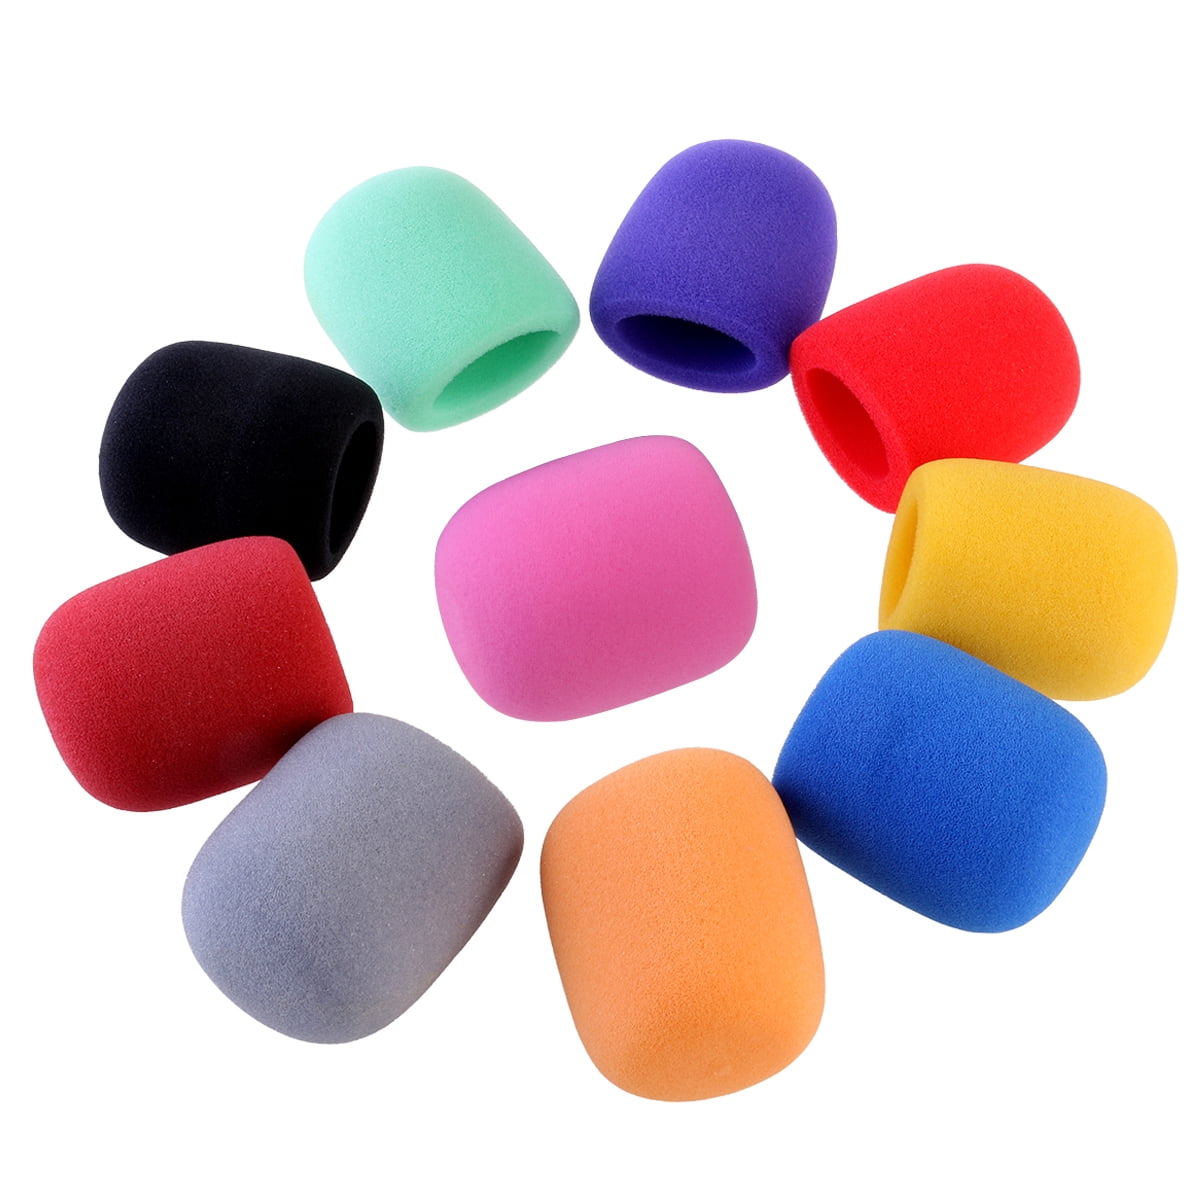 Mic Windscreen Windshield Foam Covers for Handheld Stage Microphone